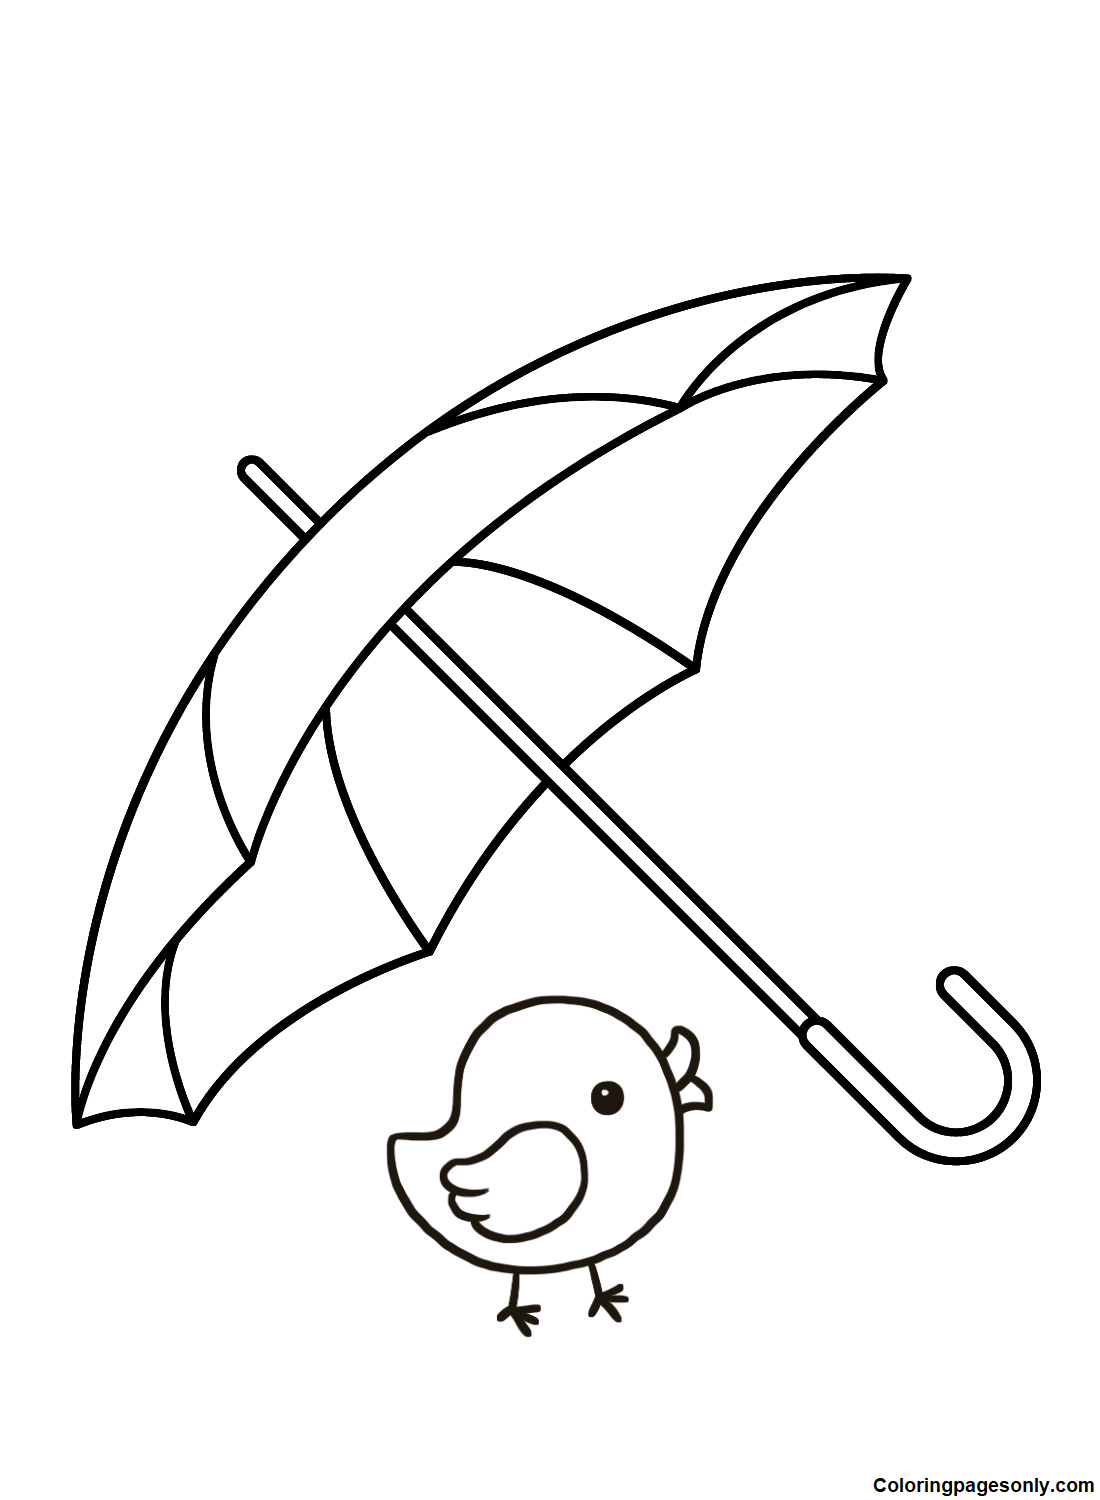 Umbrella with Chick Coloring Pages